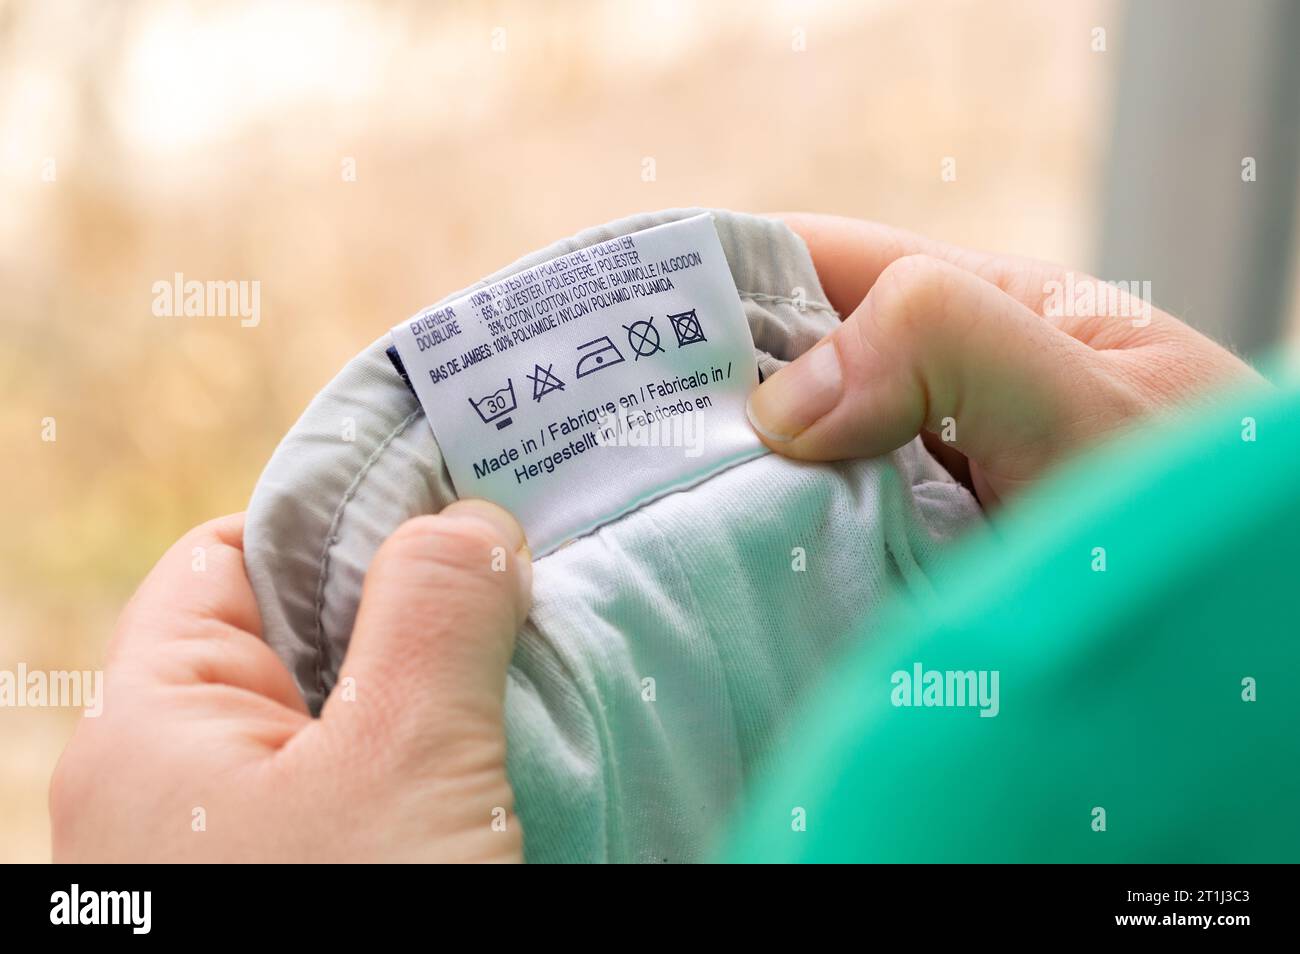 Close-up of person reading the clothing label showing washing instructions at home Stock Photo